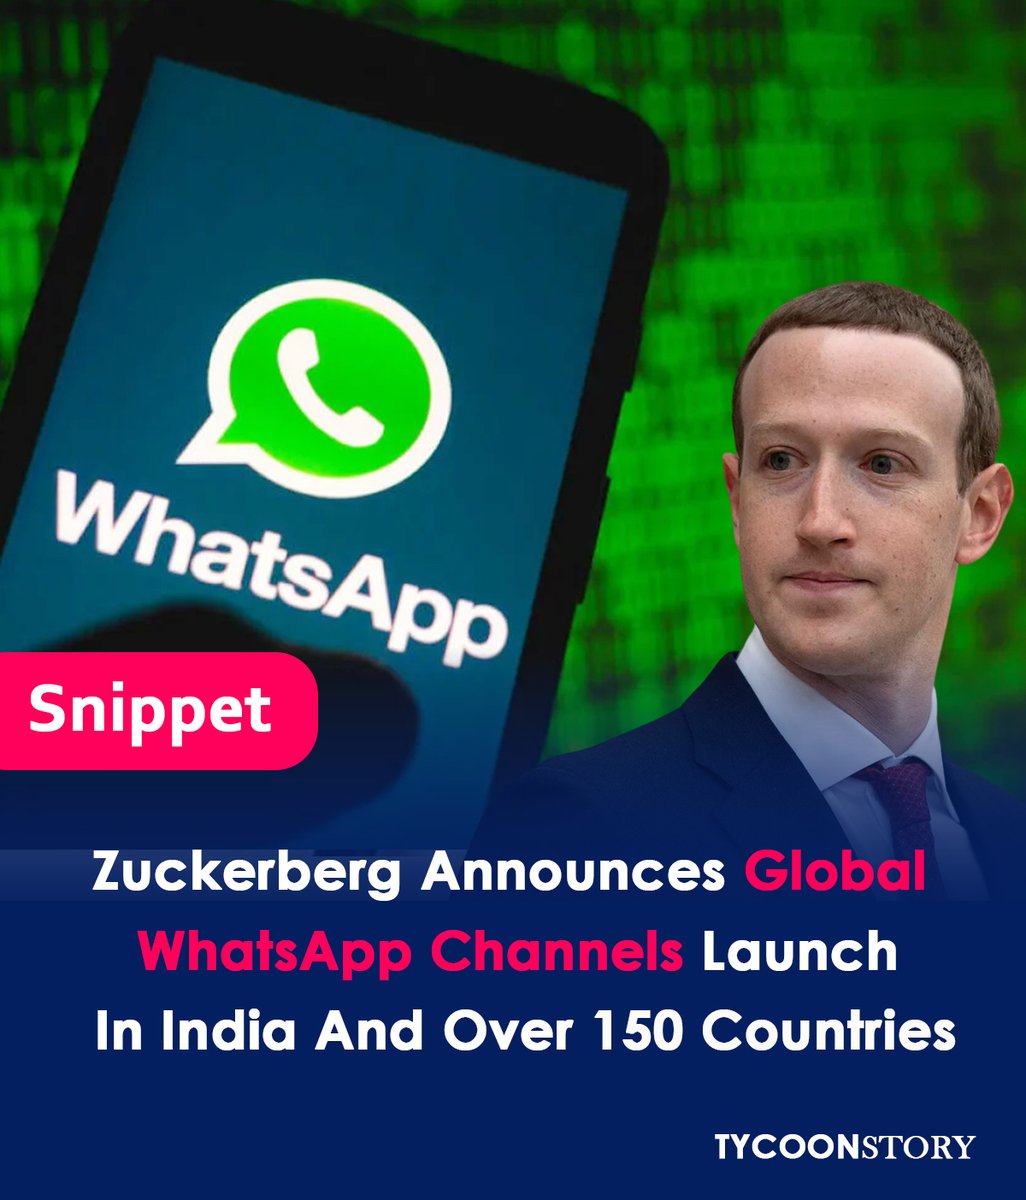 India's Whatsapp Channels Are Introduced By Mark Zuckerberg.
#whatsapp #WhatsAppChannels #users #communicate #socialnetwork #Meta #technology #zuckerberg #WhatsAppNewFeature #WhatsAppUpdates #WhatsAppPrivacy #WhatsAppIndiaLaunch #WhatsAppForIndia @Meta @WhatsApp @MarkZuc40333252